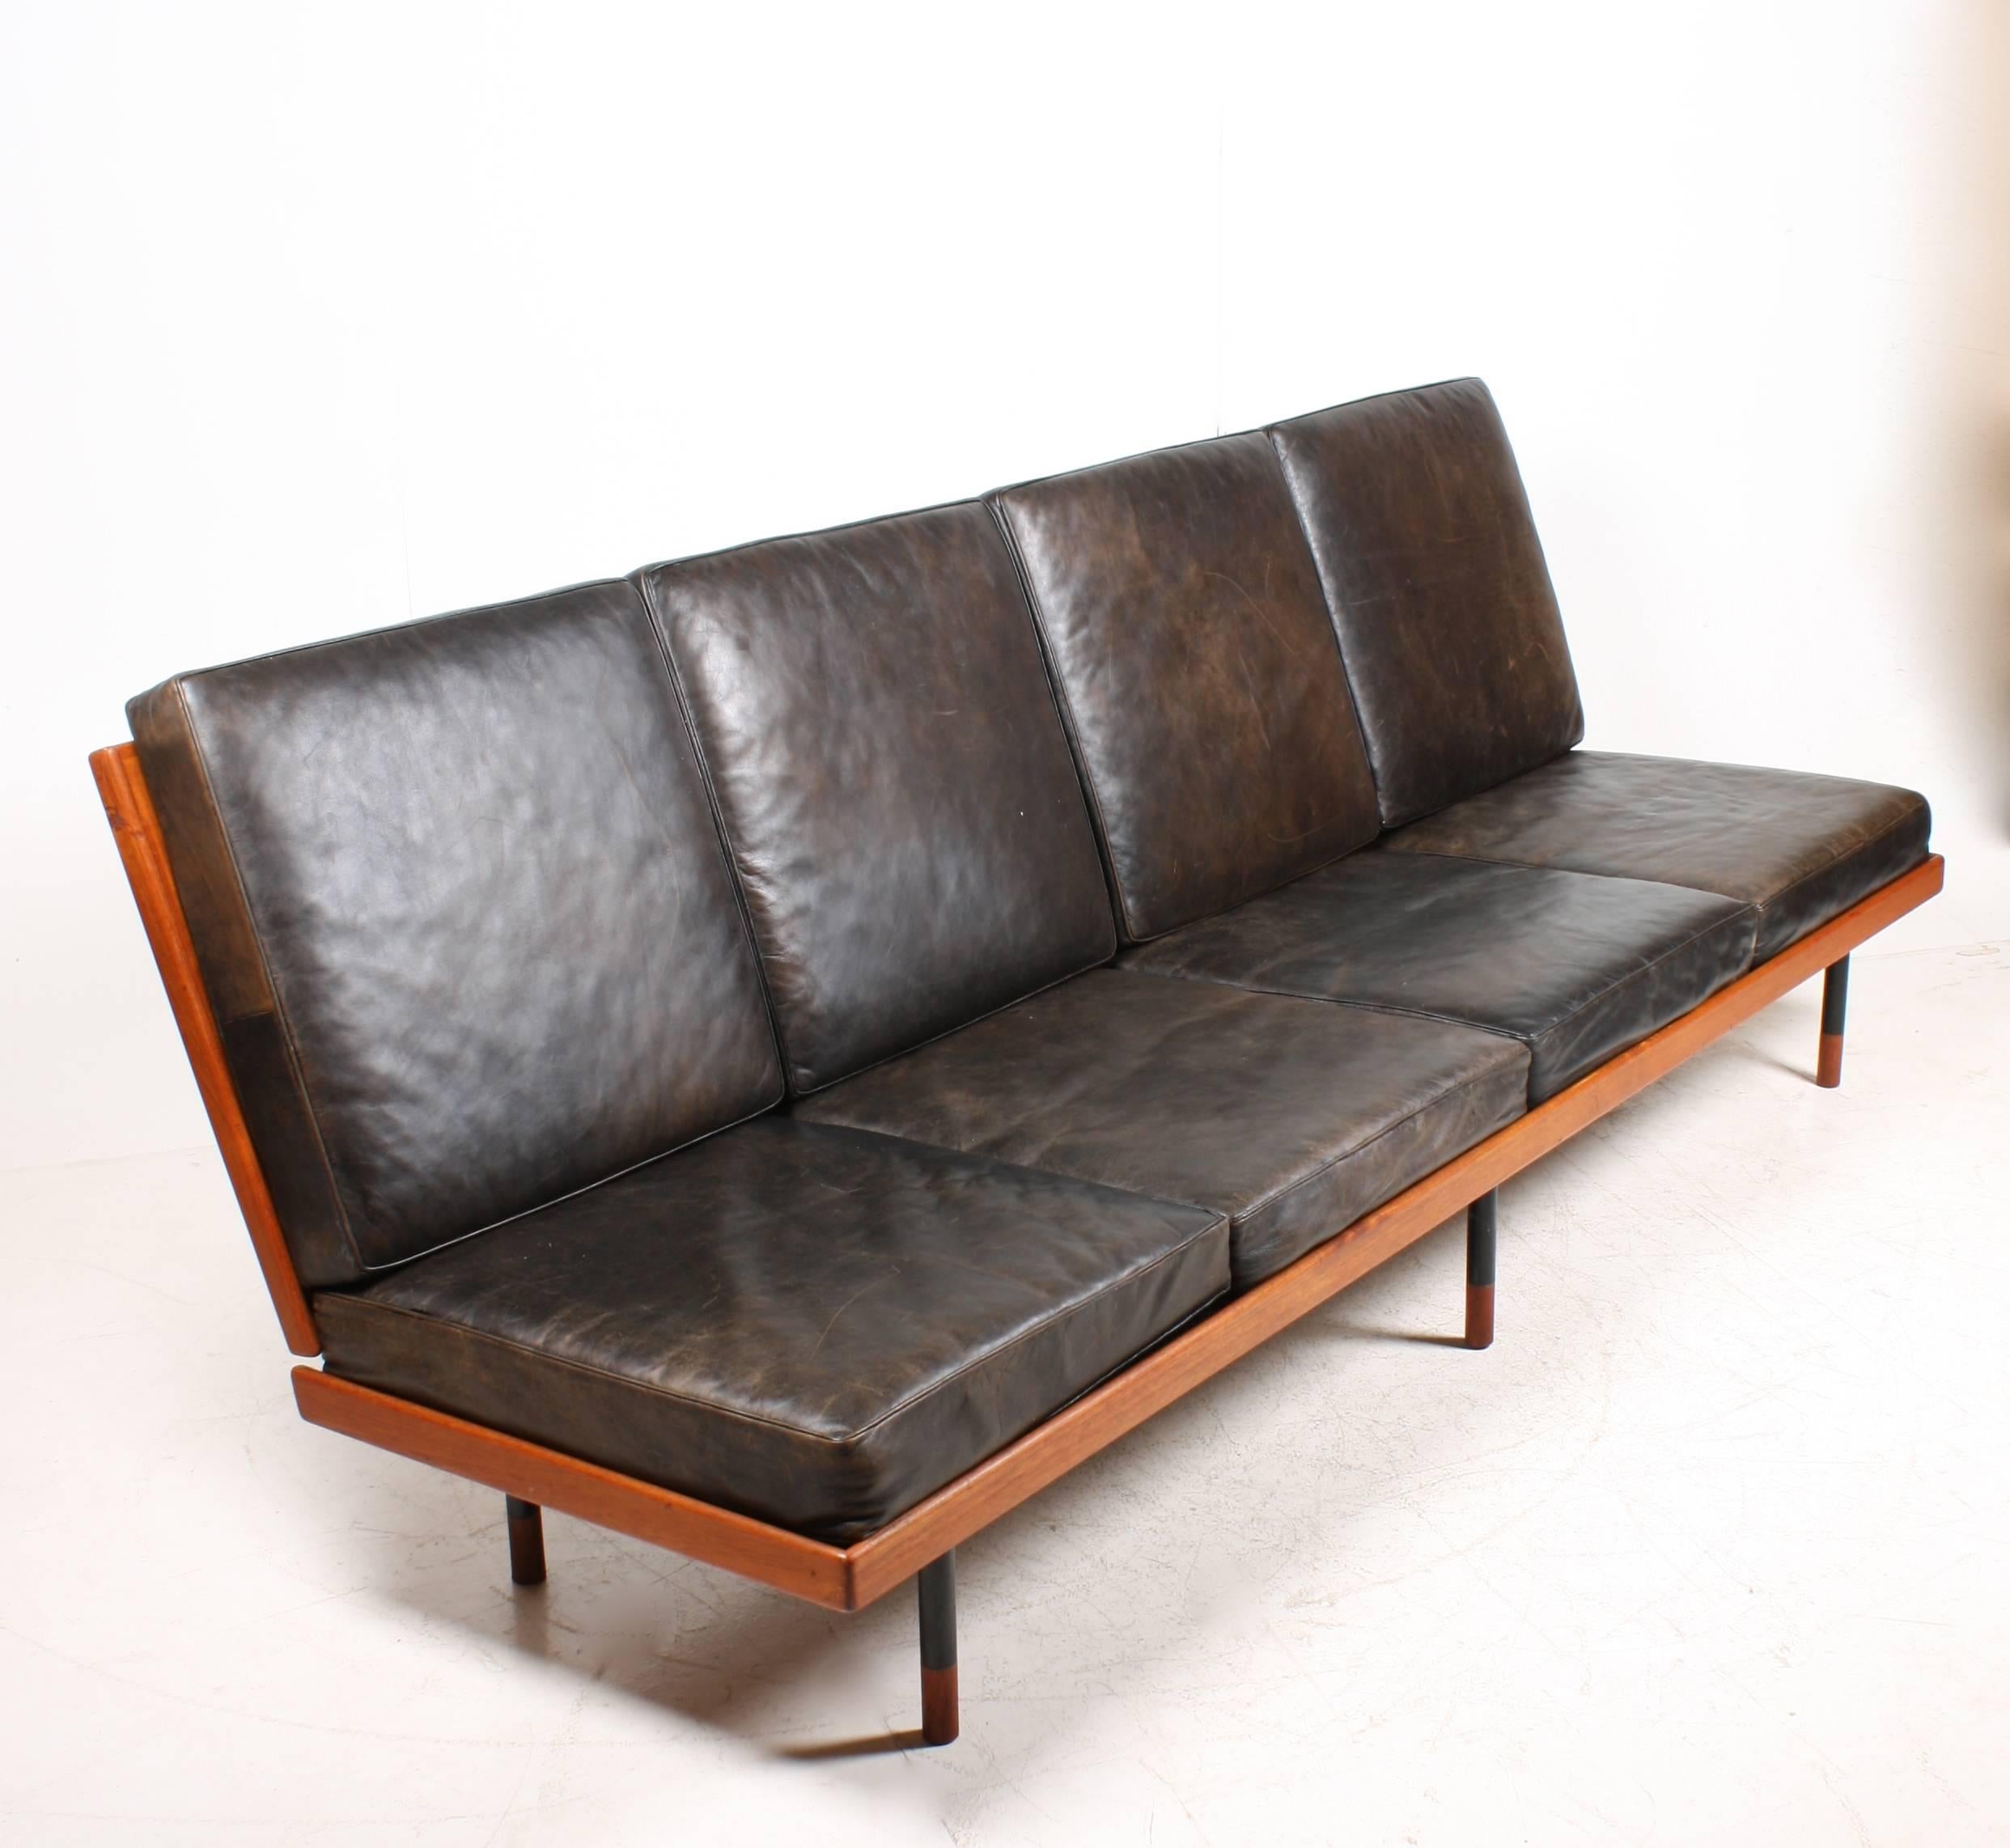 Elegant sofa with a frame of teak on metal legs. Patinated leather seat and back. Designed in the manner of the Danish designer Finn Juhl - Made Denmark in the 1950s. Great original condition.